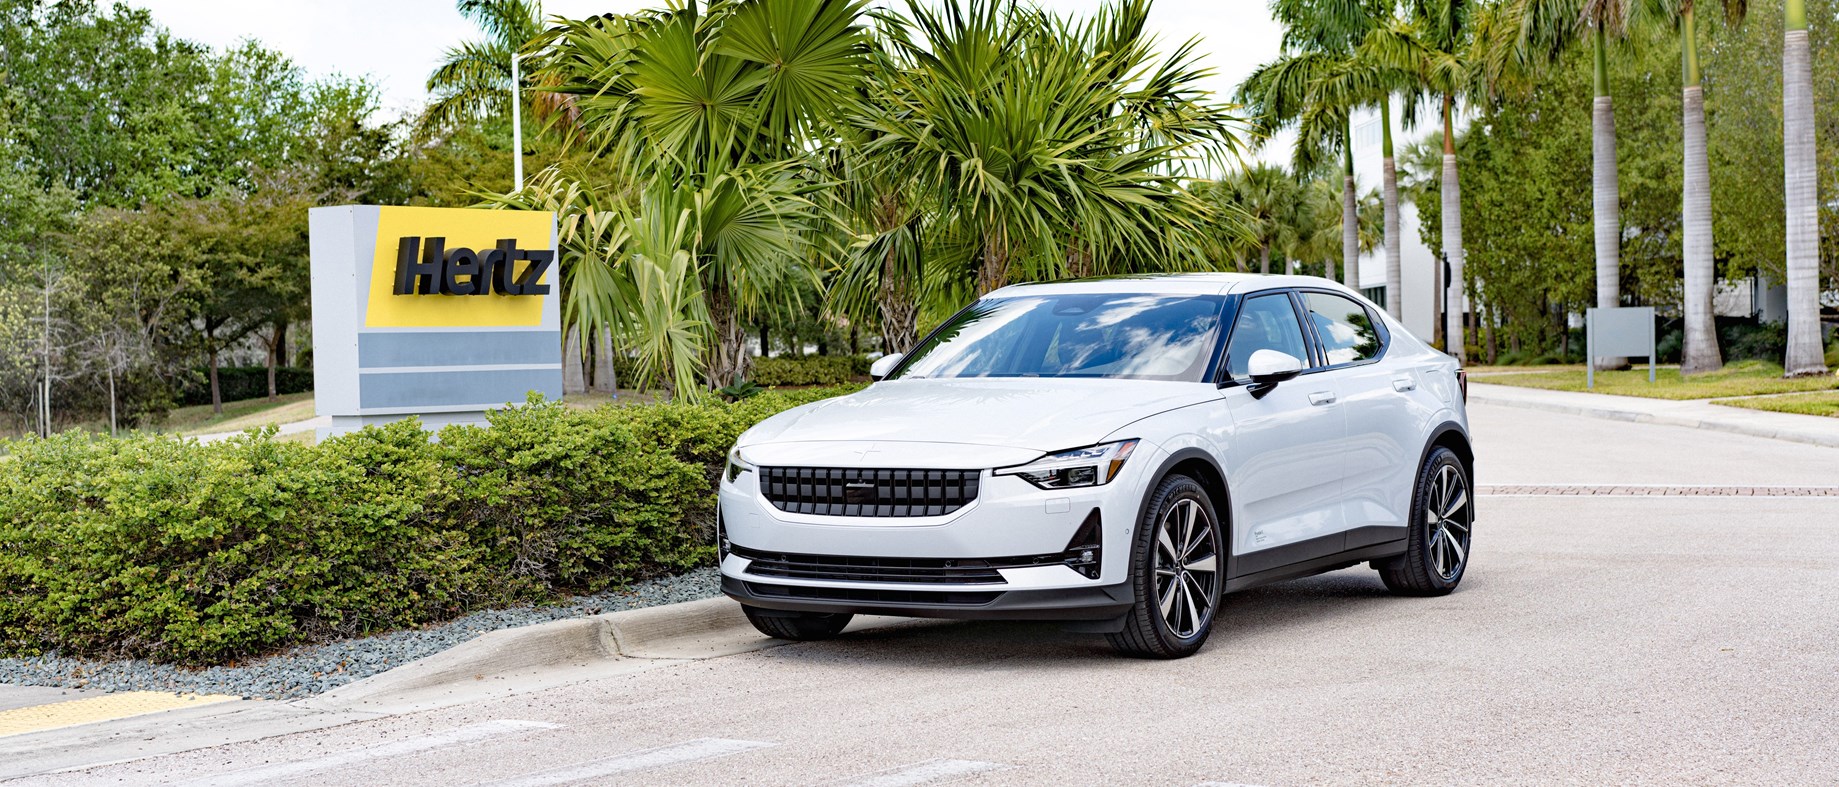 Polestar EVs will soon be widely available at Hertz